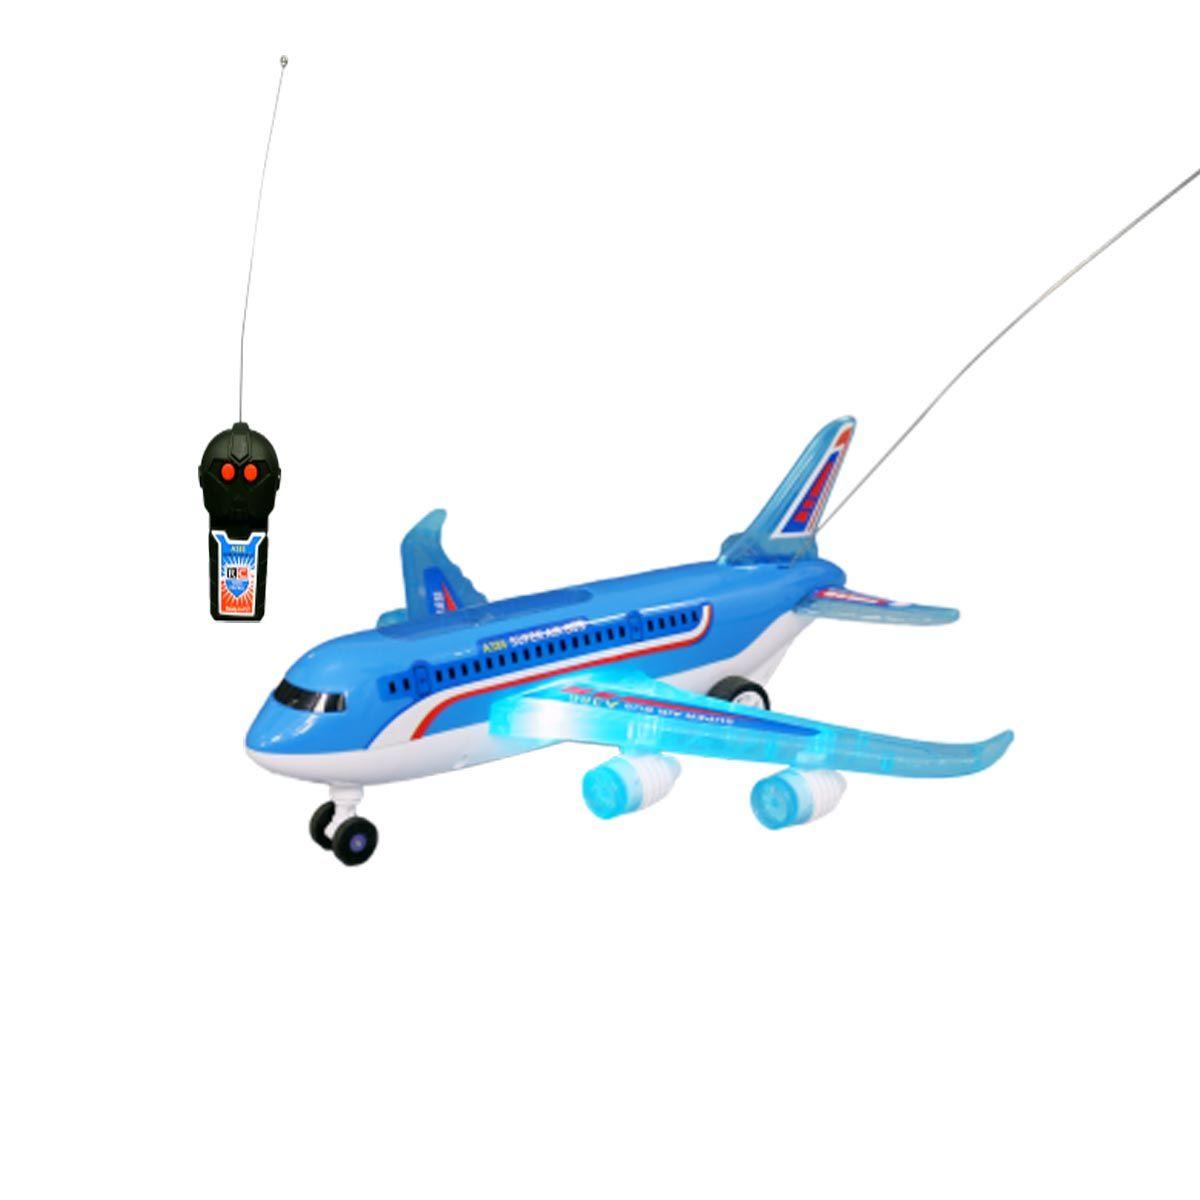 Remote Control Flying Aeroplane Toy: Categories of Remote Control Flying Aeroplane Toys